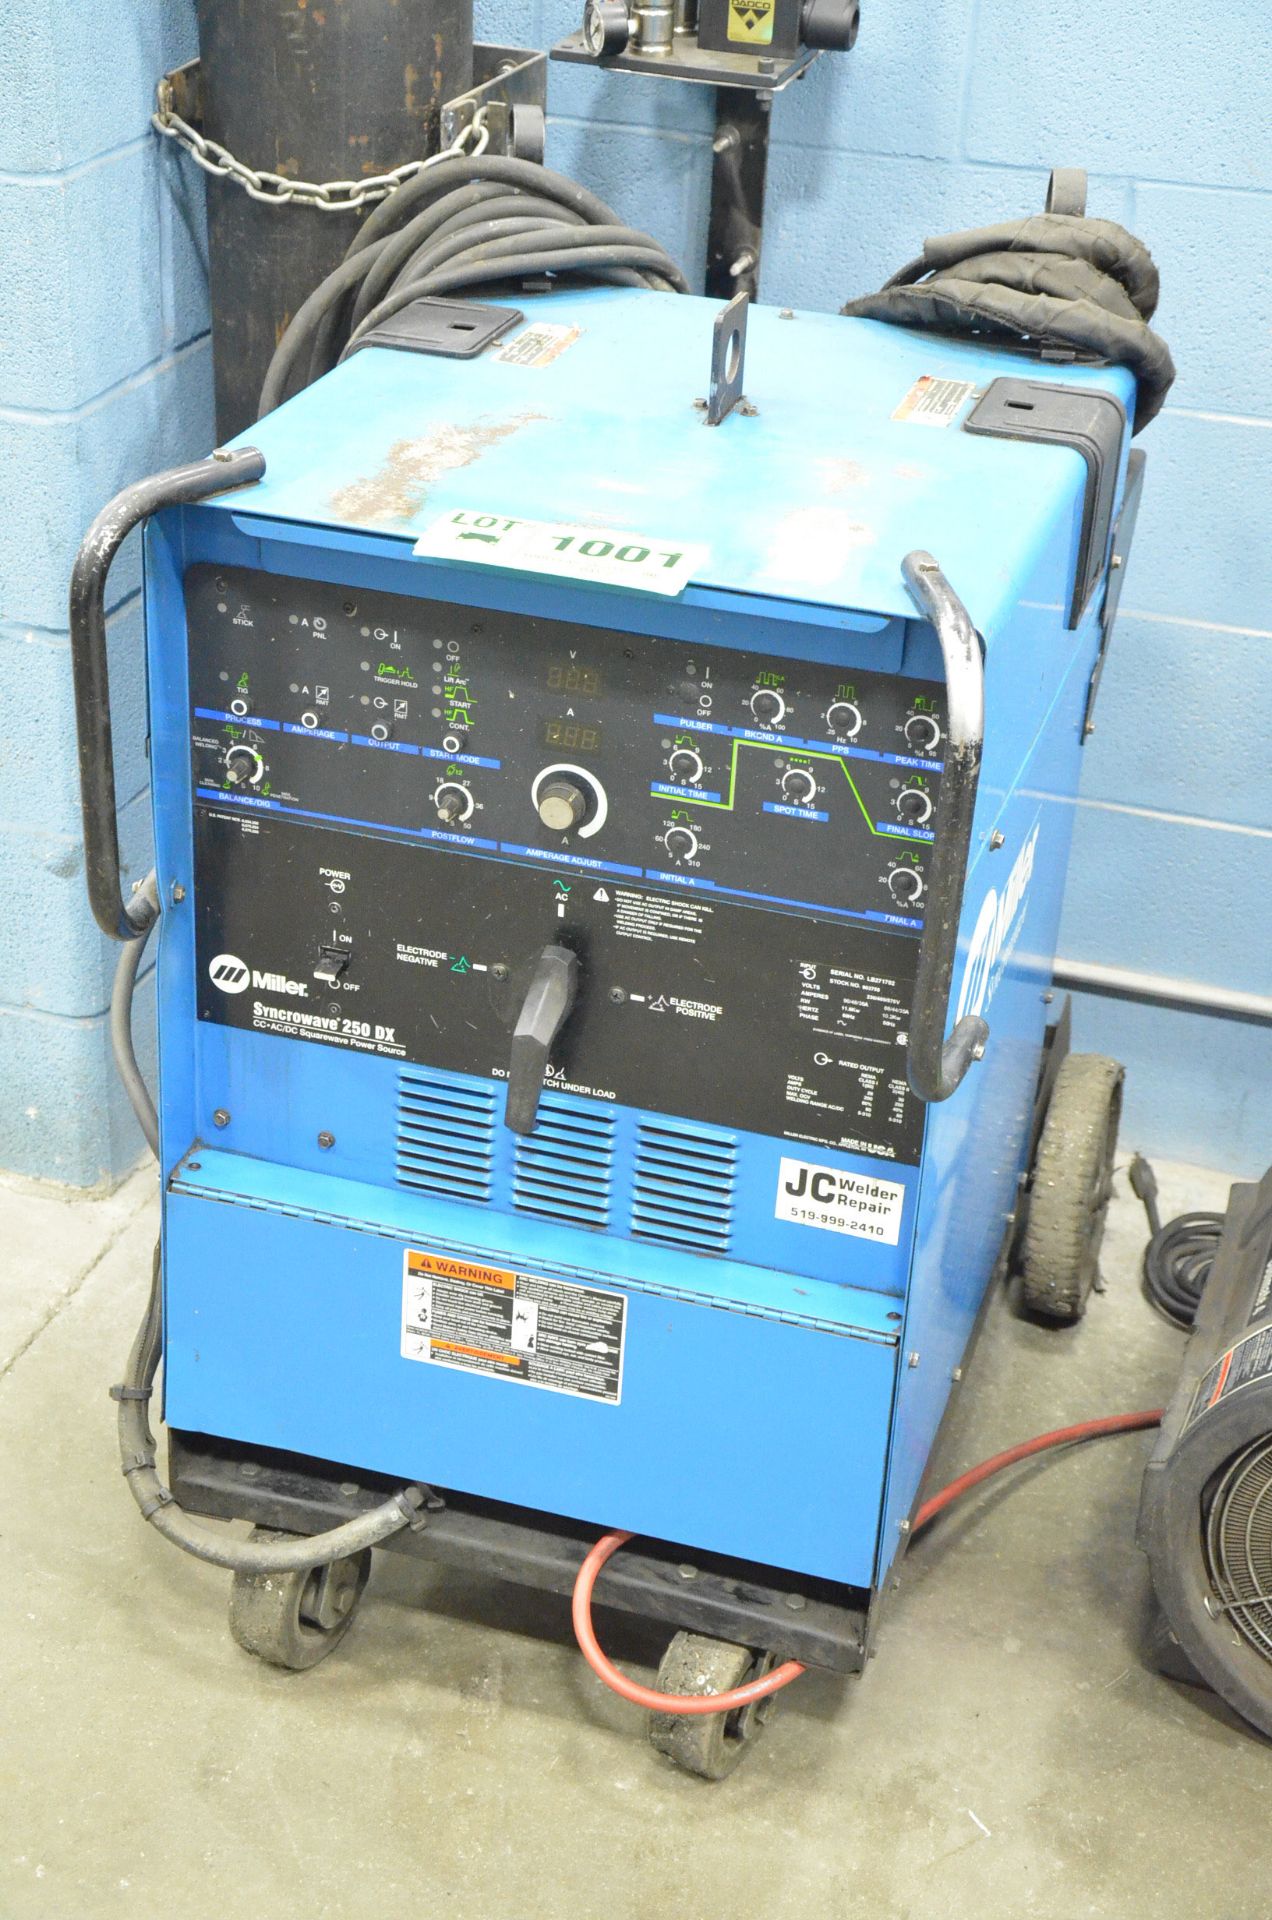 MILLER SYNCROWAVE 250 DX PORTABLE DIGITAL TIG WELDER WITH CABLES AND GUN, S/N: LB271702 (GAS - Image 2 of 4